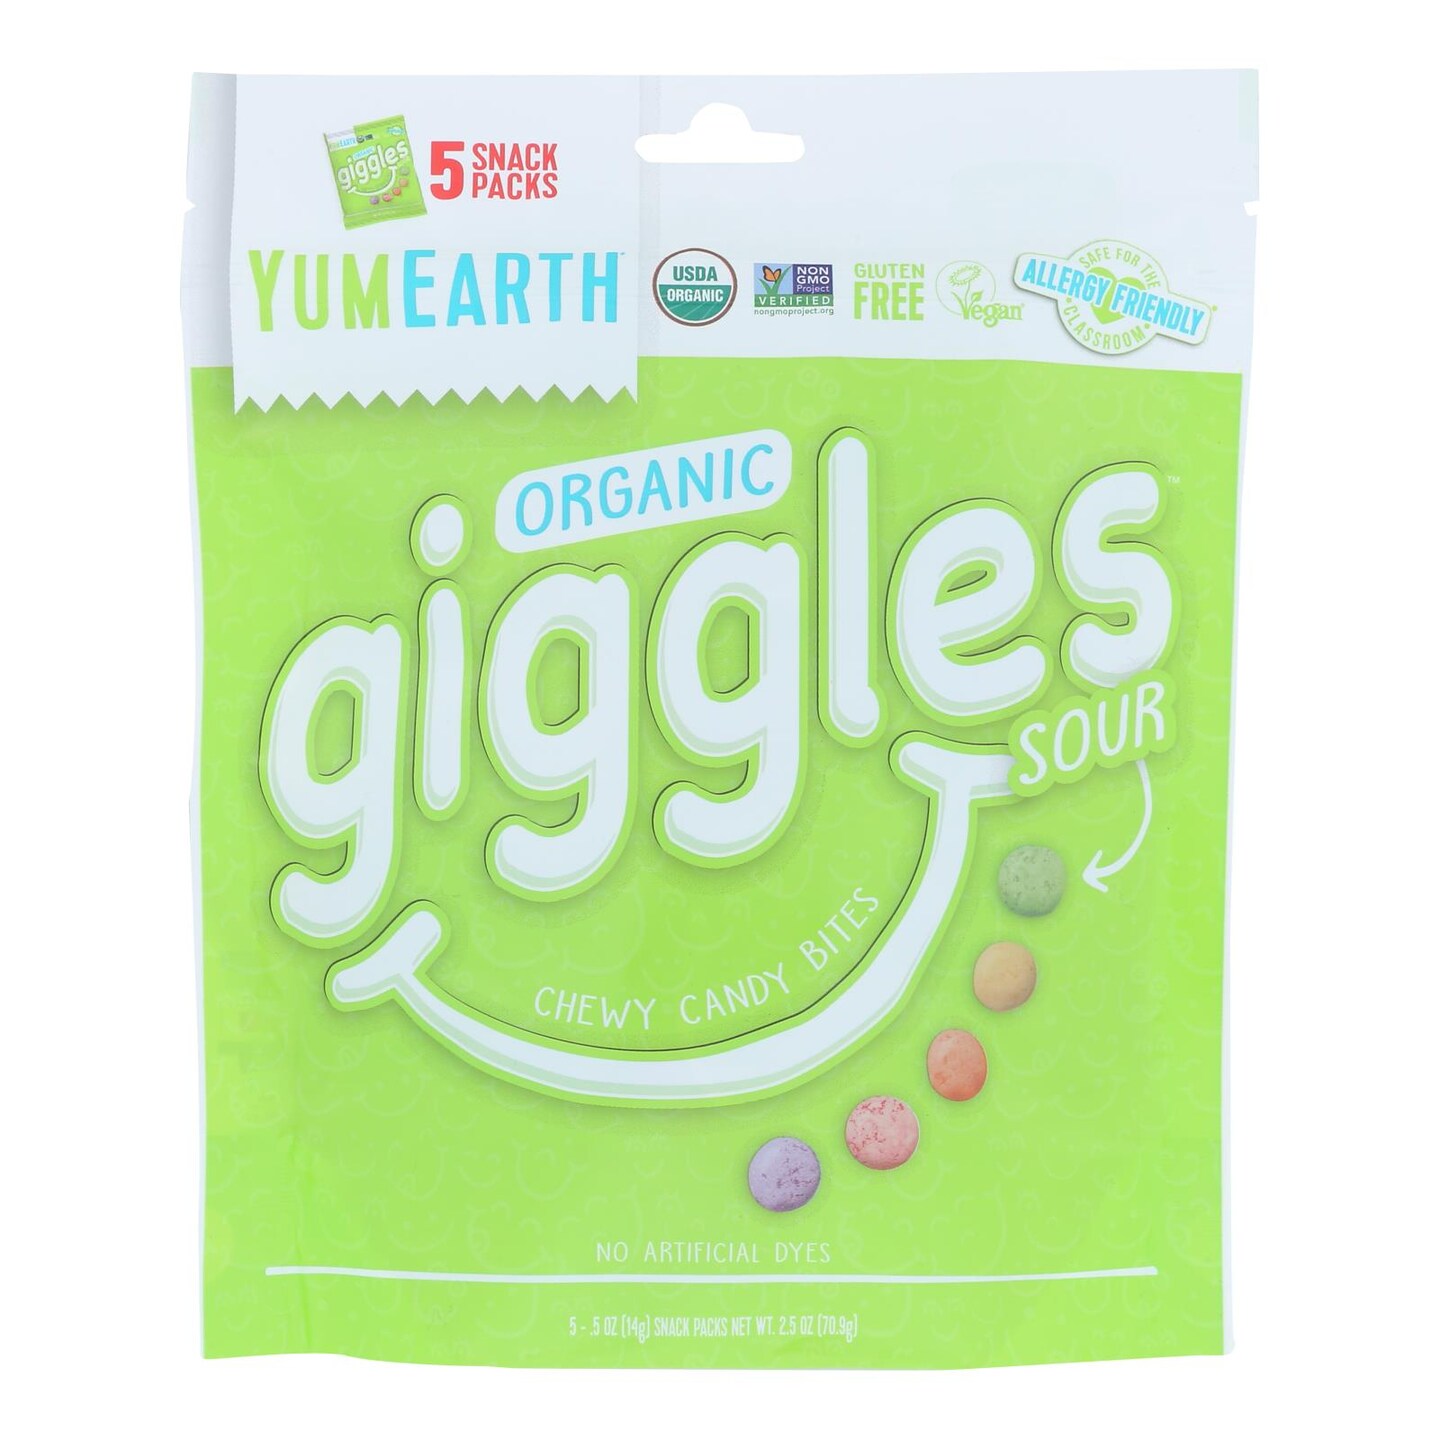 Yumearth - Candy Bag Og2 Giggles Chewy - 5 Pack Case Of 12 2.5 Oz